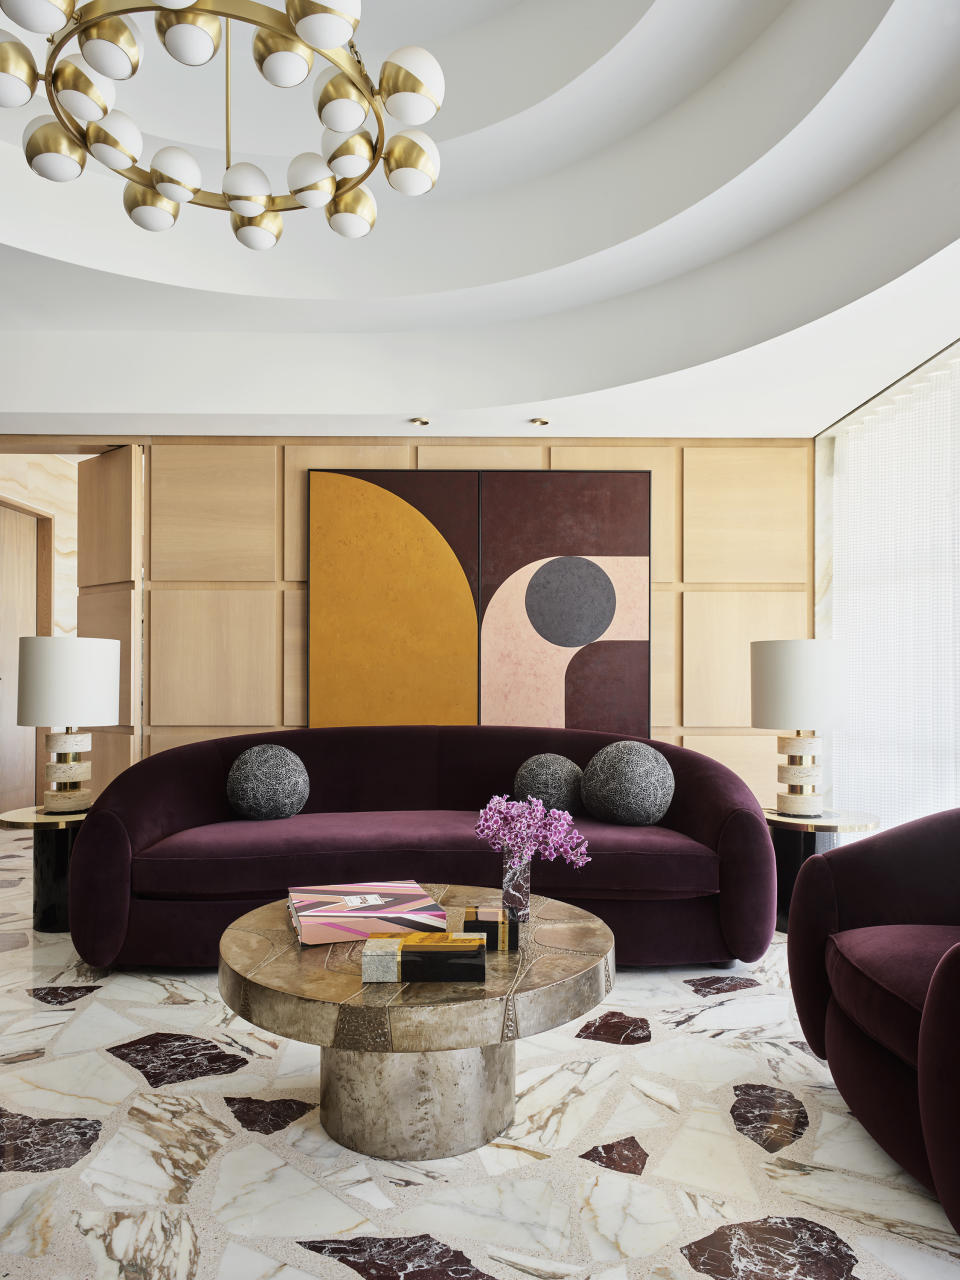 reception room with square wooden panelling, curved purple sofa and terrazzo floor